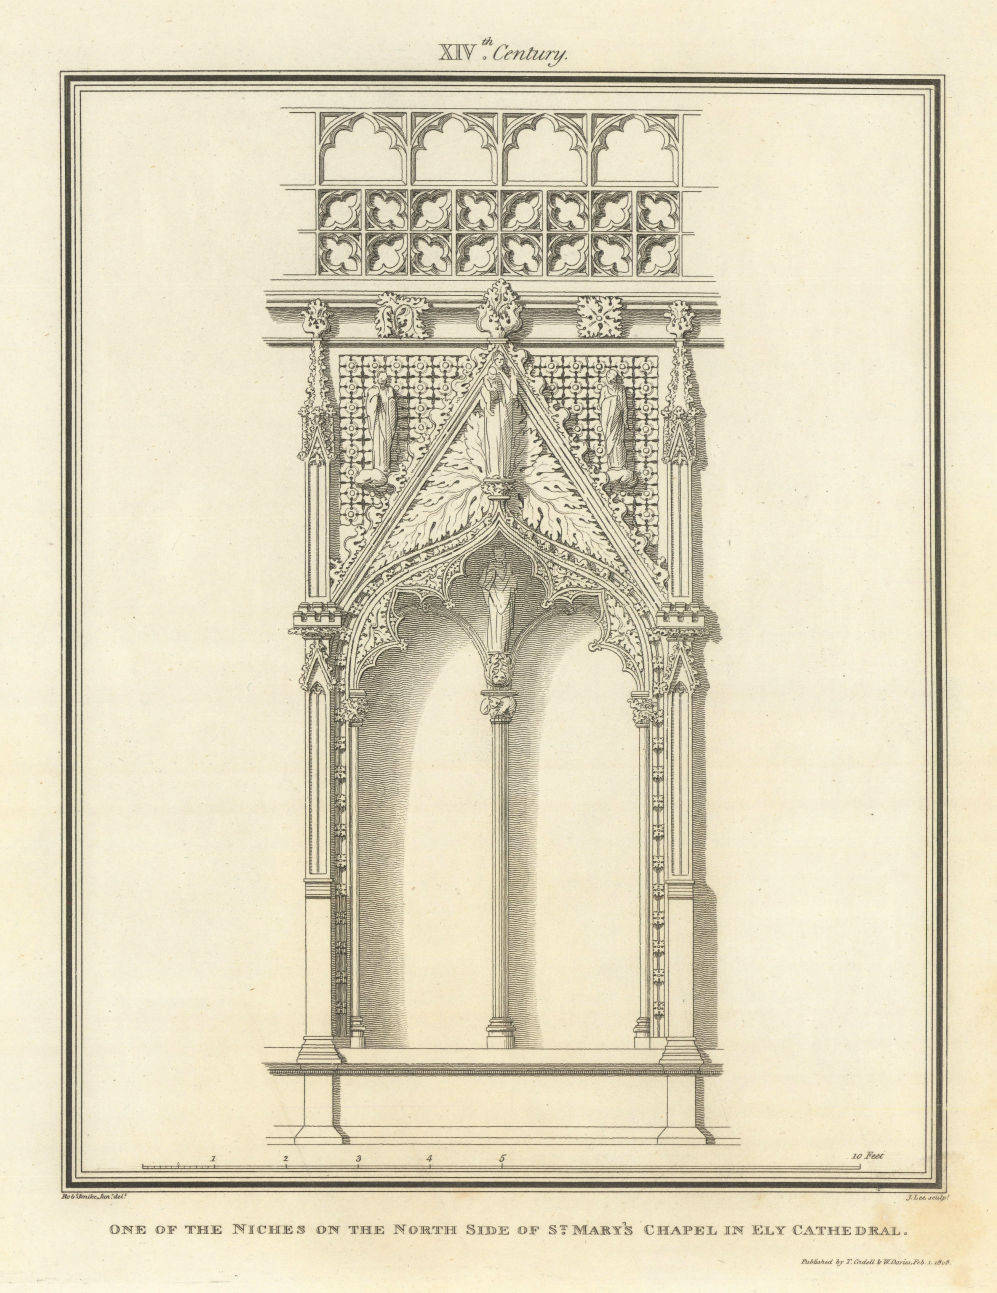 Associate Product Niche on the north side of St. Mary's Chapel in Ely Cathedral. SMIRKE 1810